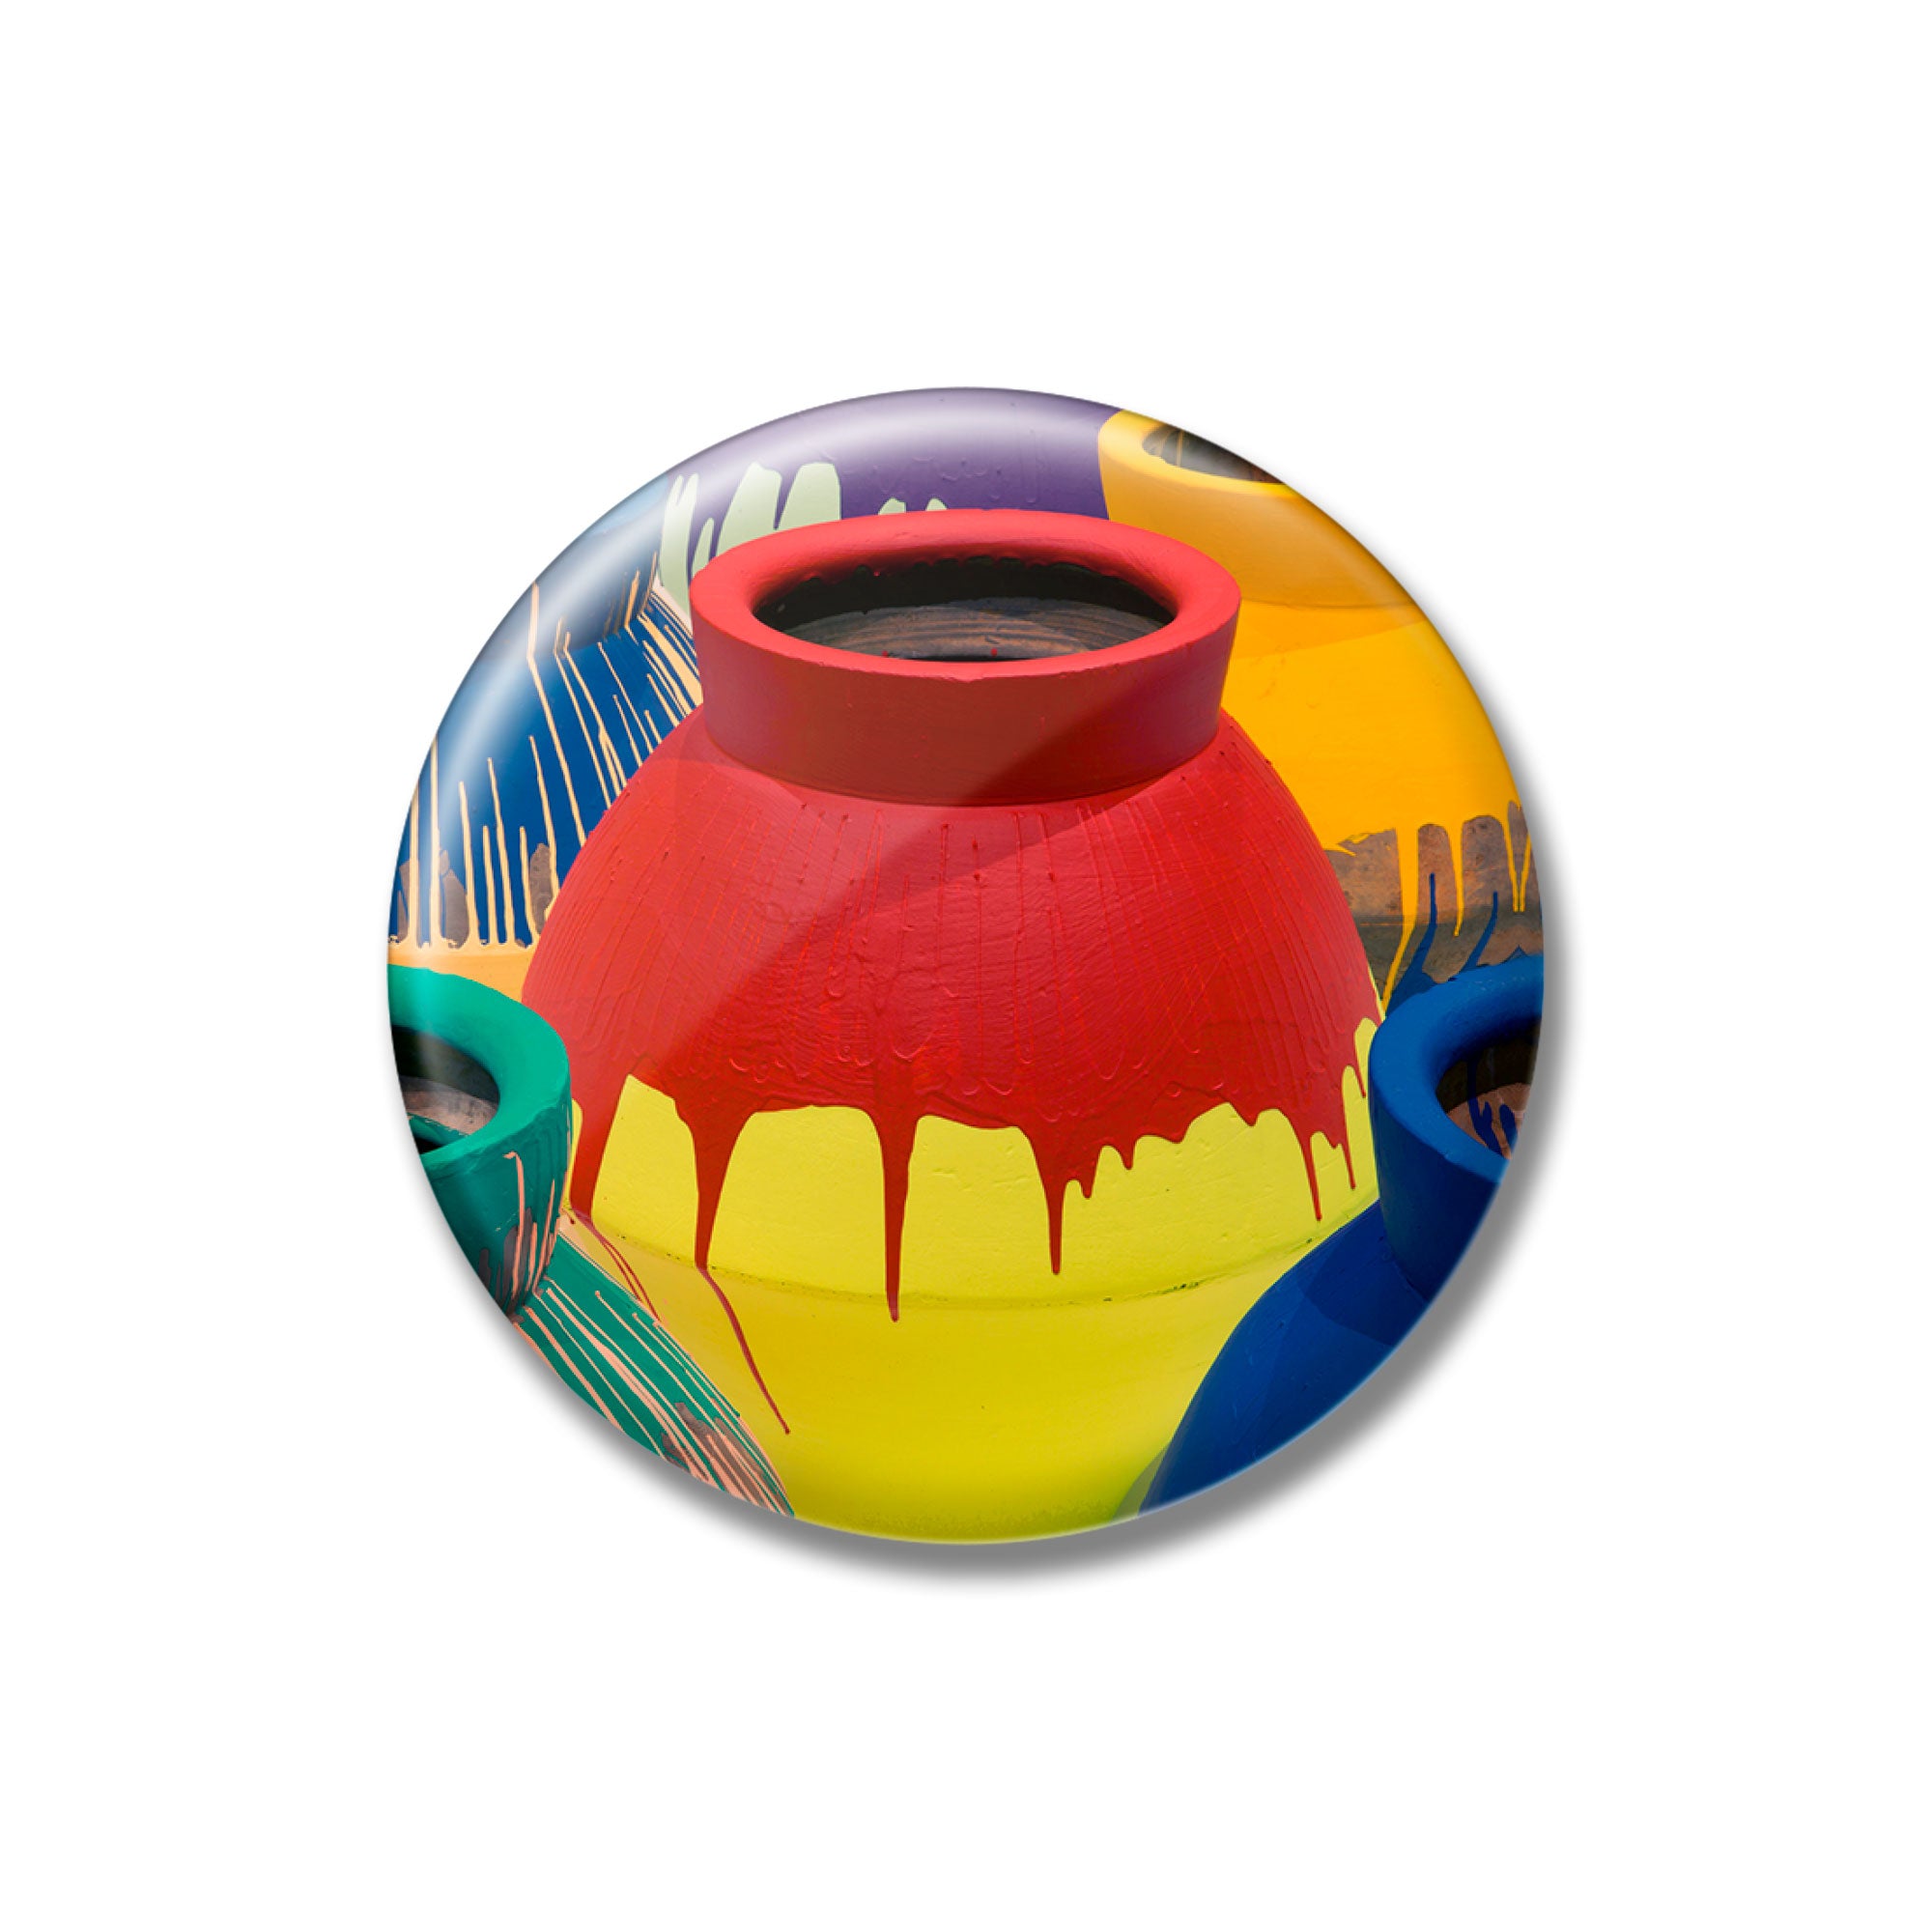 Weiwei - Vases 2.25" Button – Museum